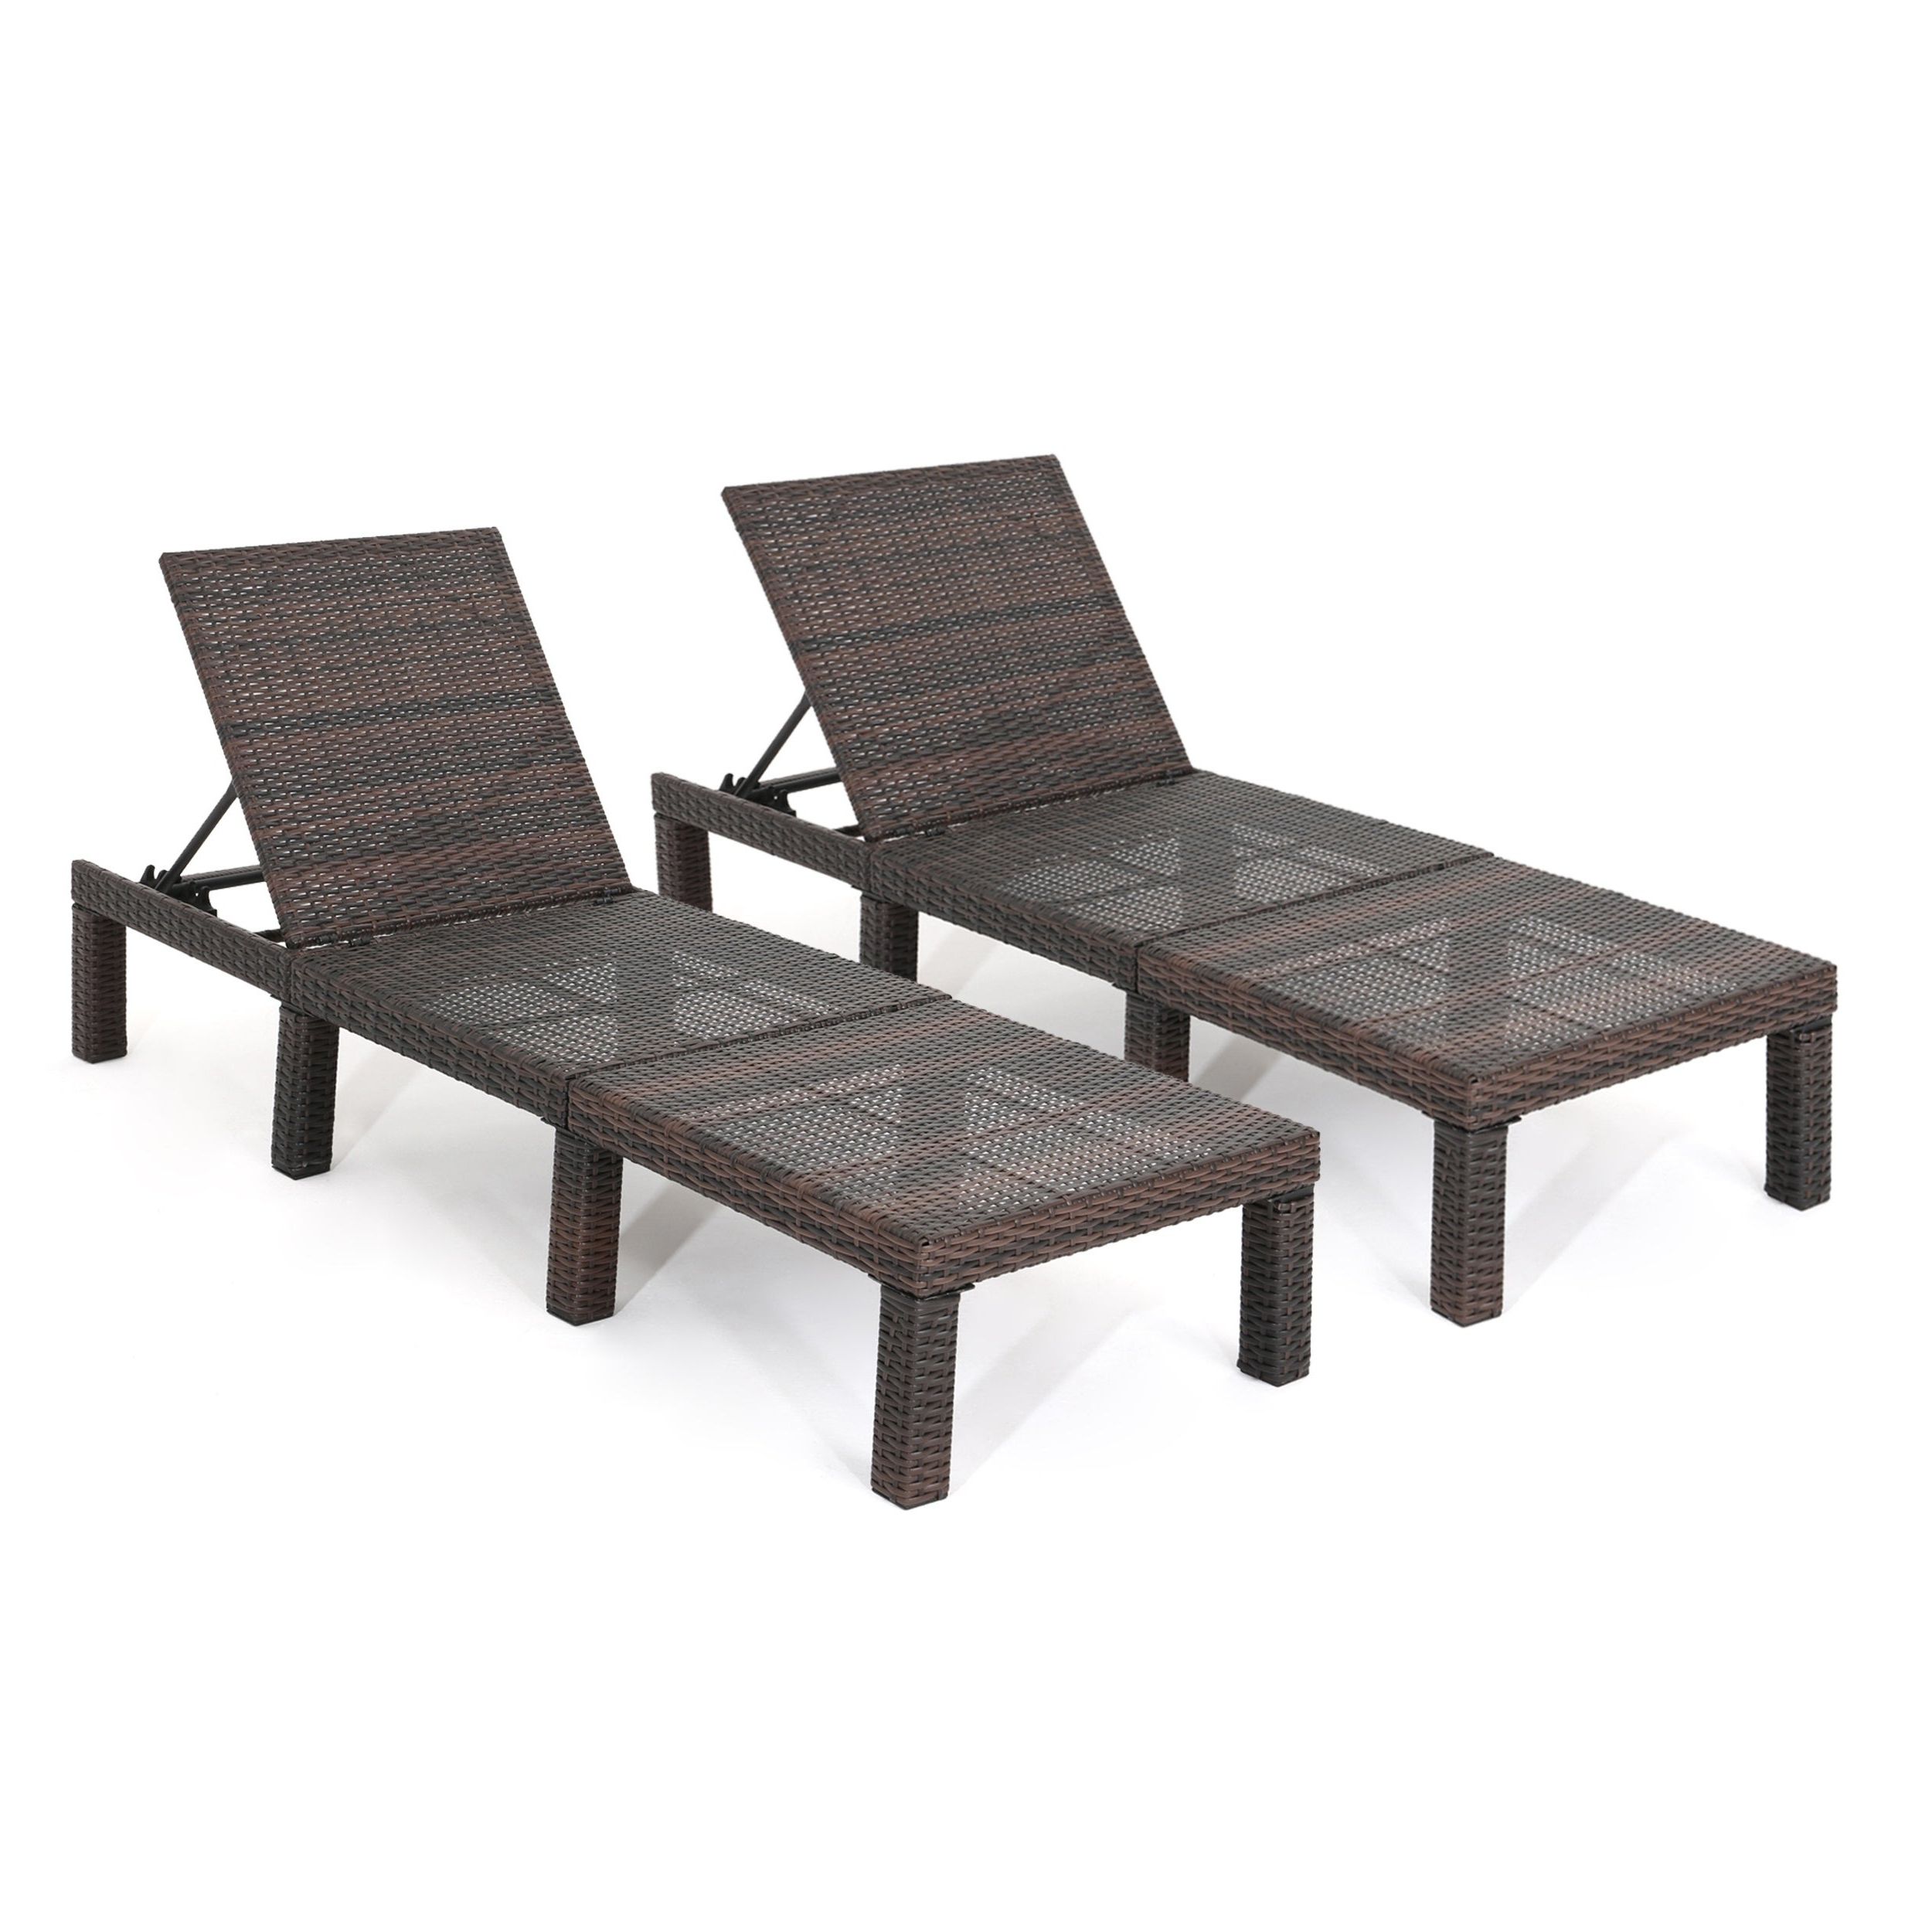 Newest Jamaica Outdoor Chaise Lounges With Regard To Jamaica Outdoor Chaise Lounge (set Of 2)christopher Knight Home (View 3 of 25)